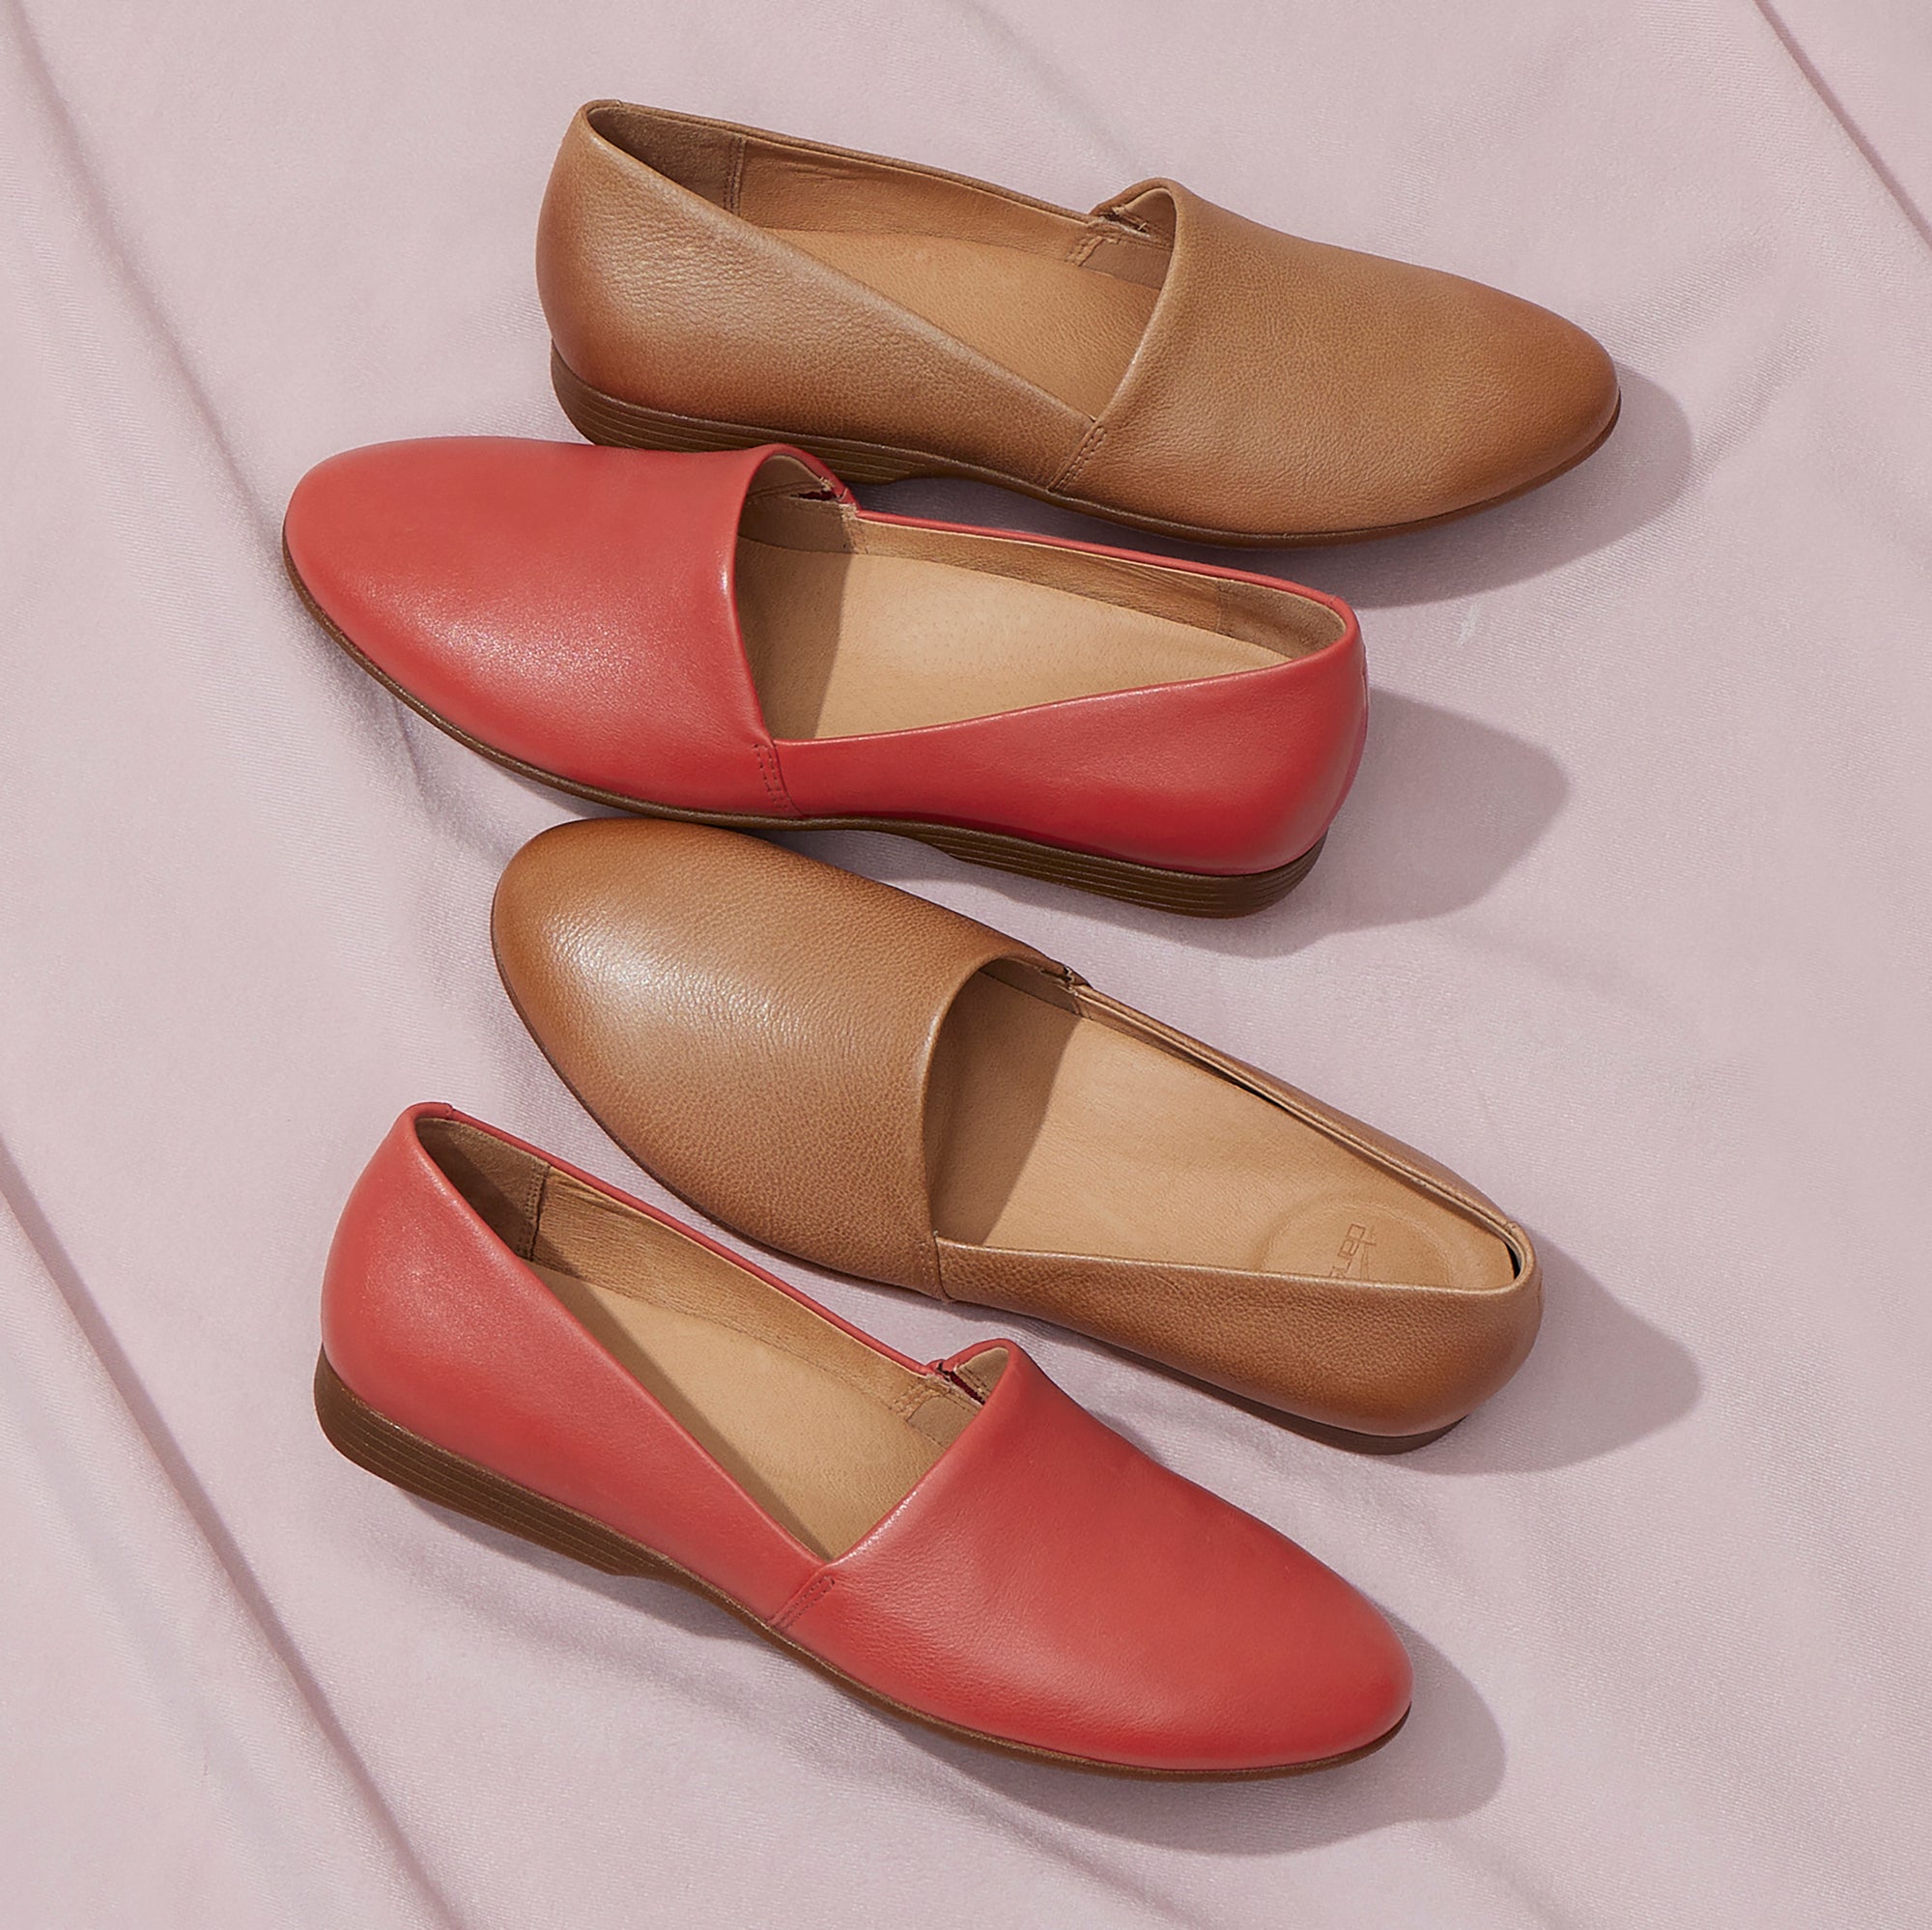 Two colors of a leather flat with a contoured footbed.